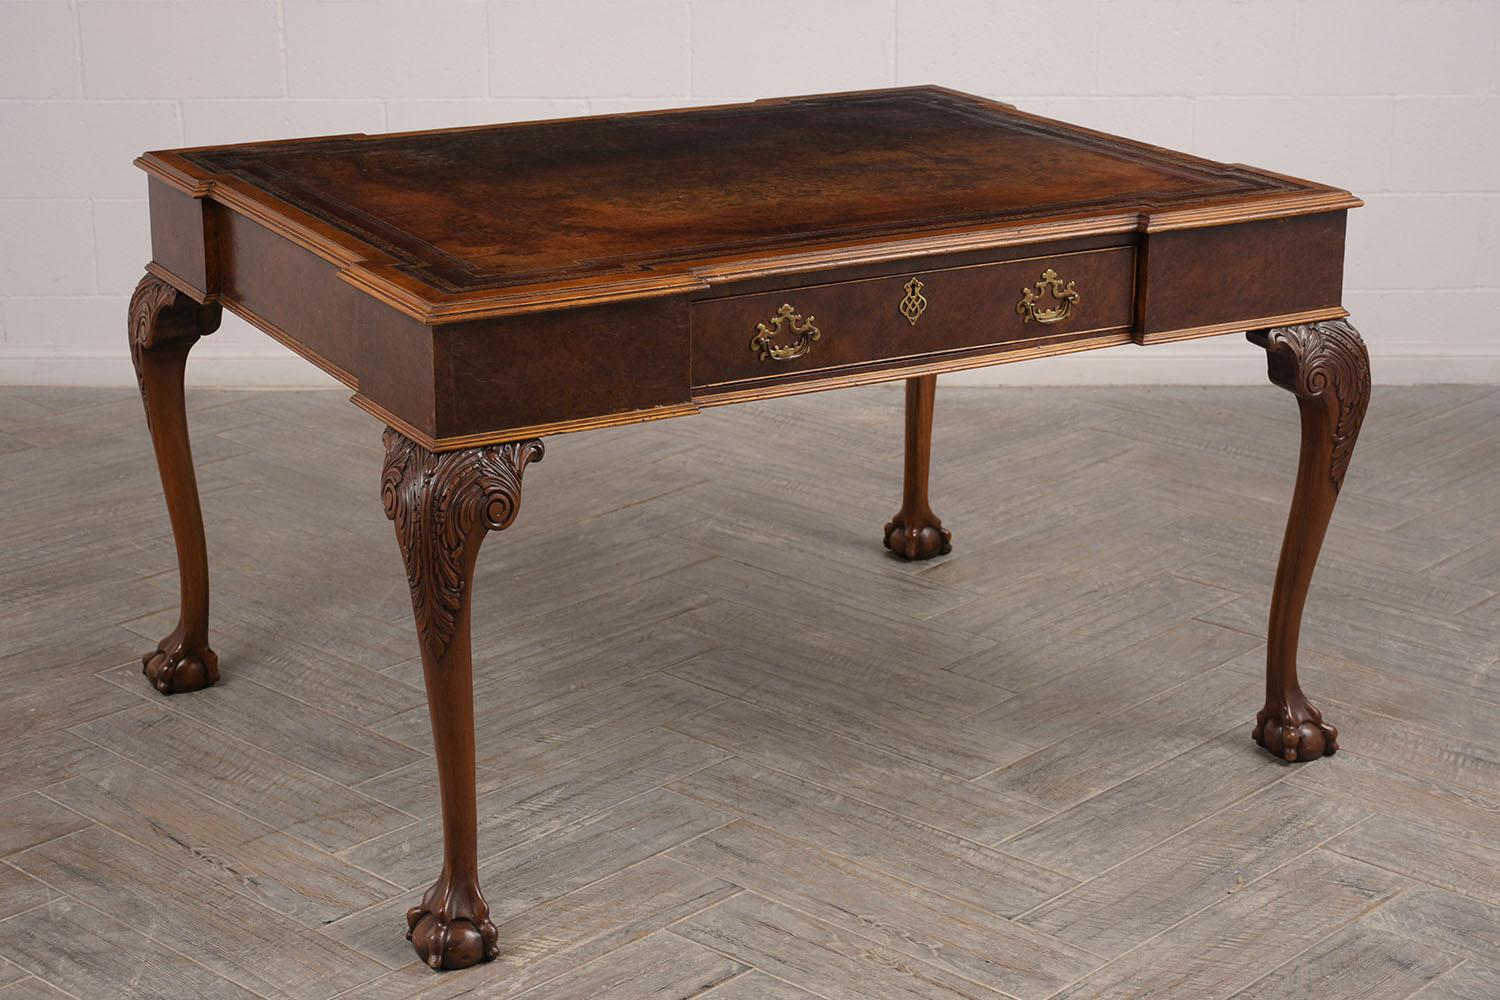 This is a 1880s partners desk. Made from mahogany wood, with its original finish. Has original embossed leather top, that has been re-dyed in a dark brown color. Both sides have a single center drawer with Dual brass handles and a center design